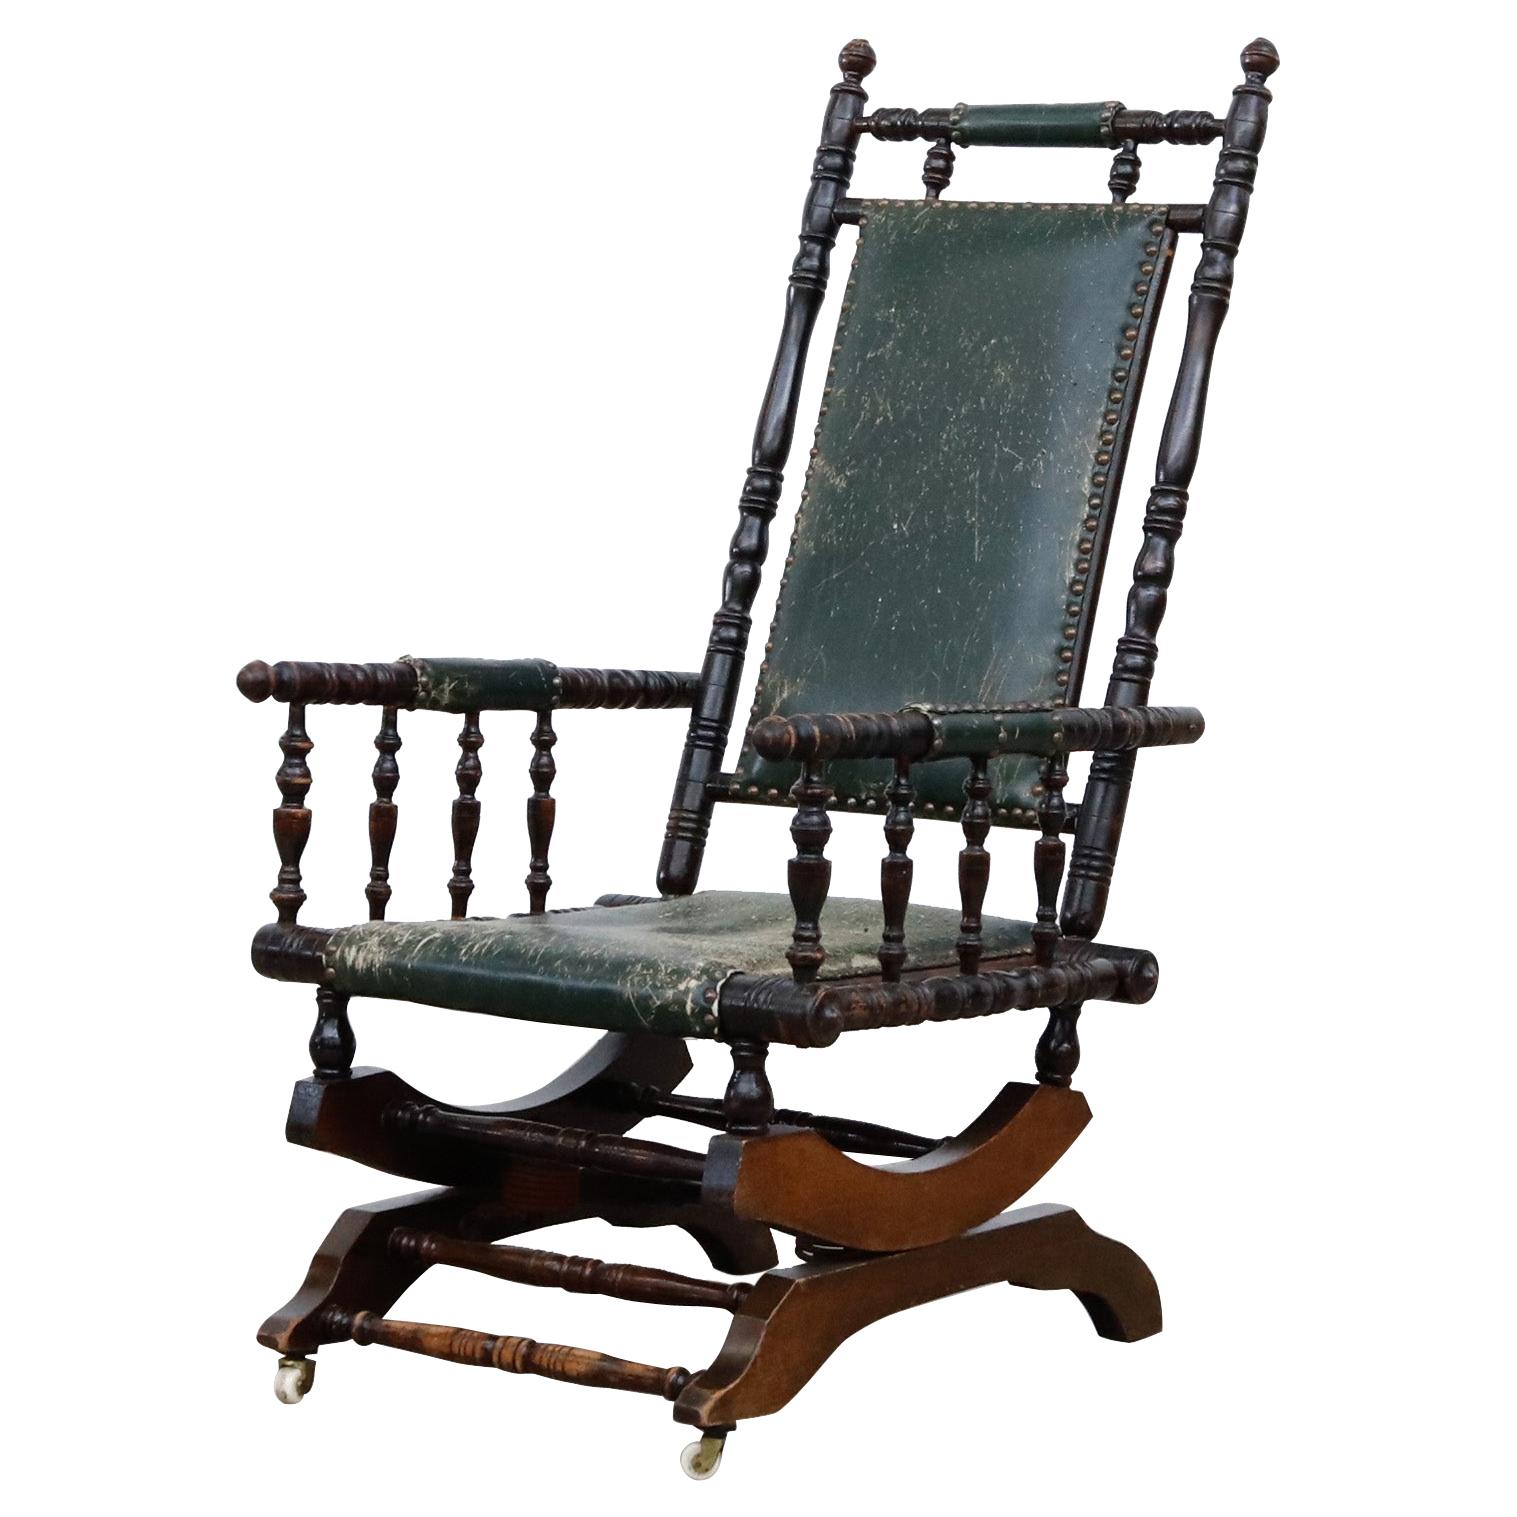 Hindeloopen Style Spindled Rocking Chair with Studded Emerald Green Leather Seat